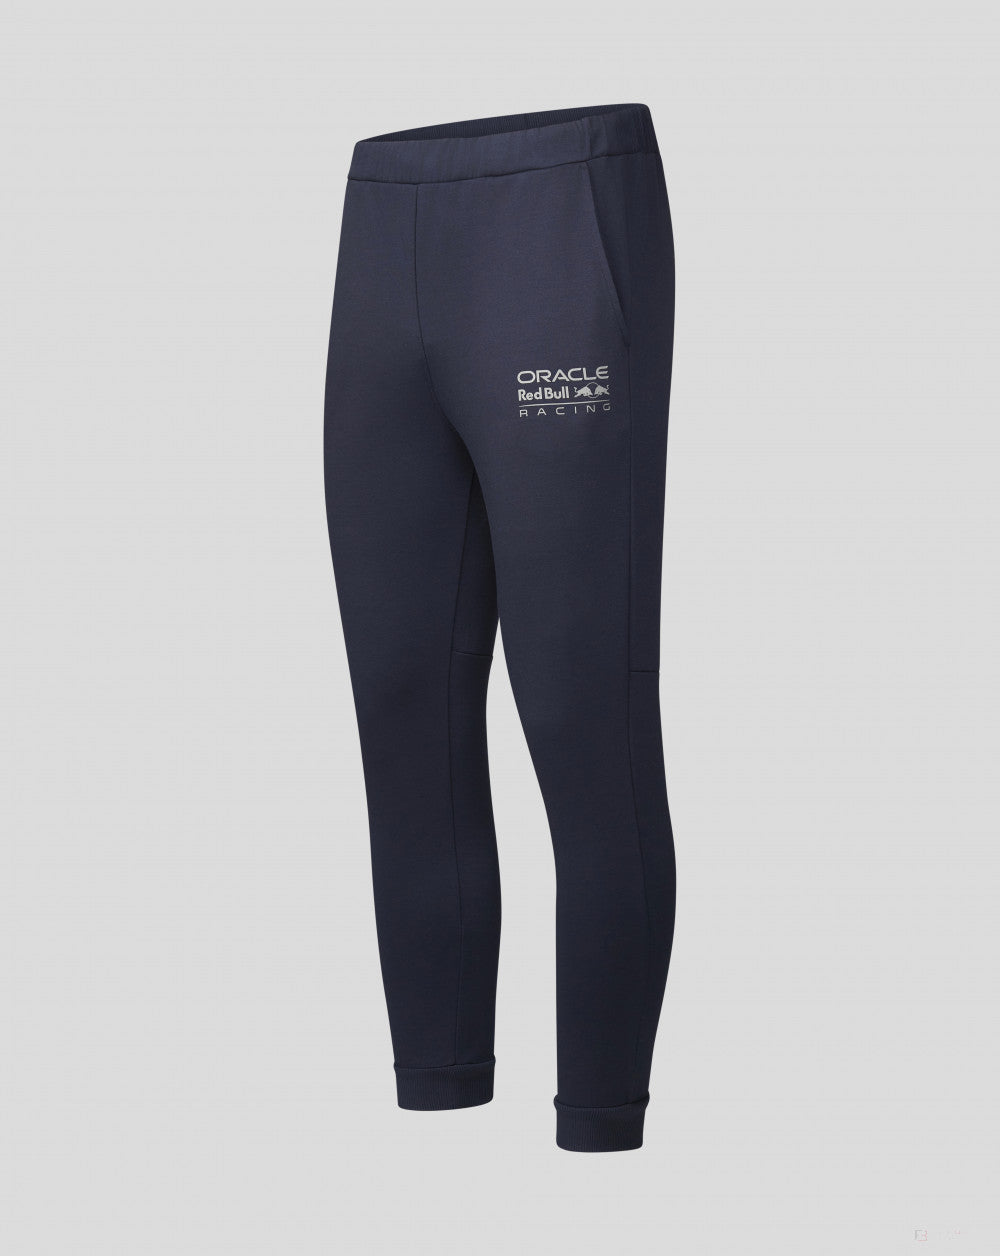 Red Bull Lifestyle Pant - FansBRANDS®